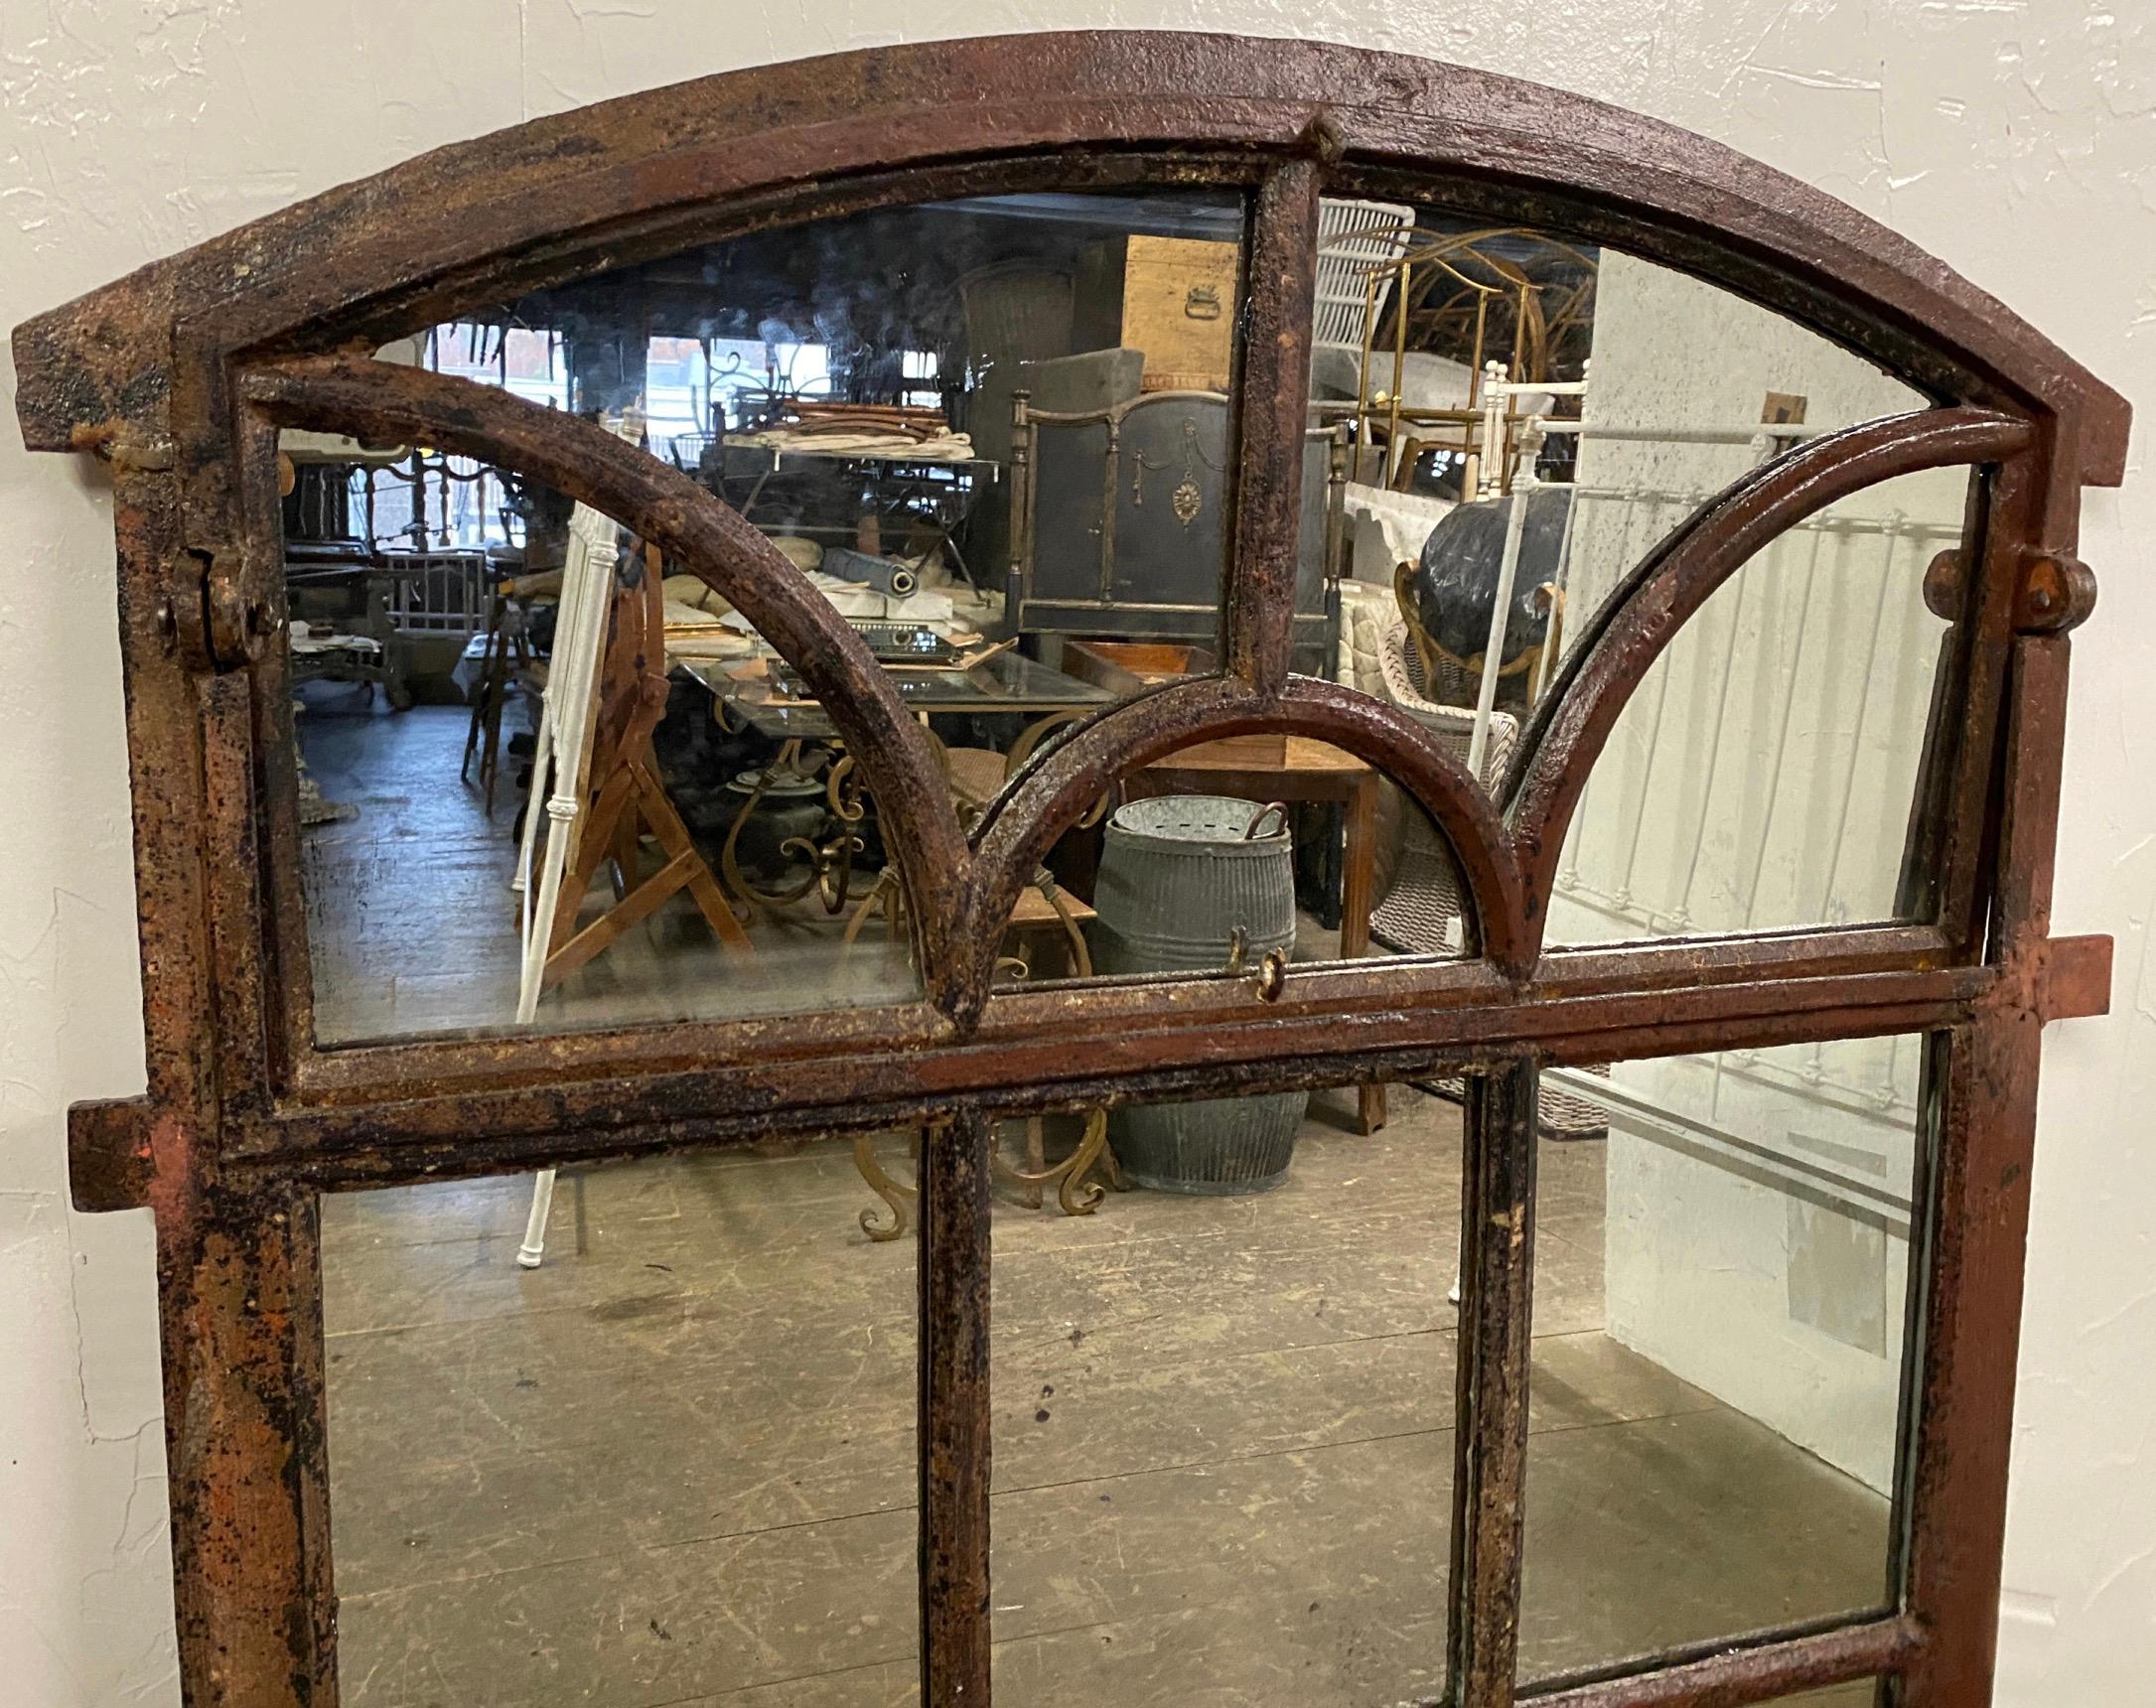 A handsome and elegant antique Neo-classic Tuilleries Orangerie wall mirror with arched top made of hand crafted cast iron antique frame that once was a window from a French chateau with inserted mirrored panels.
Can be used as a wall hanging or in